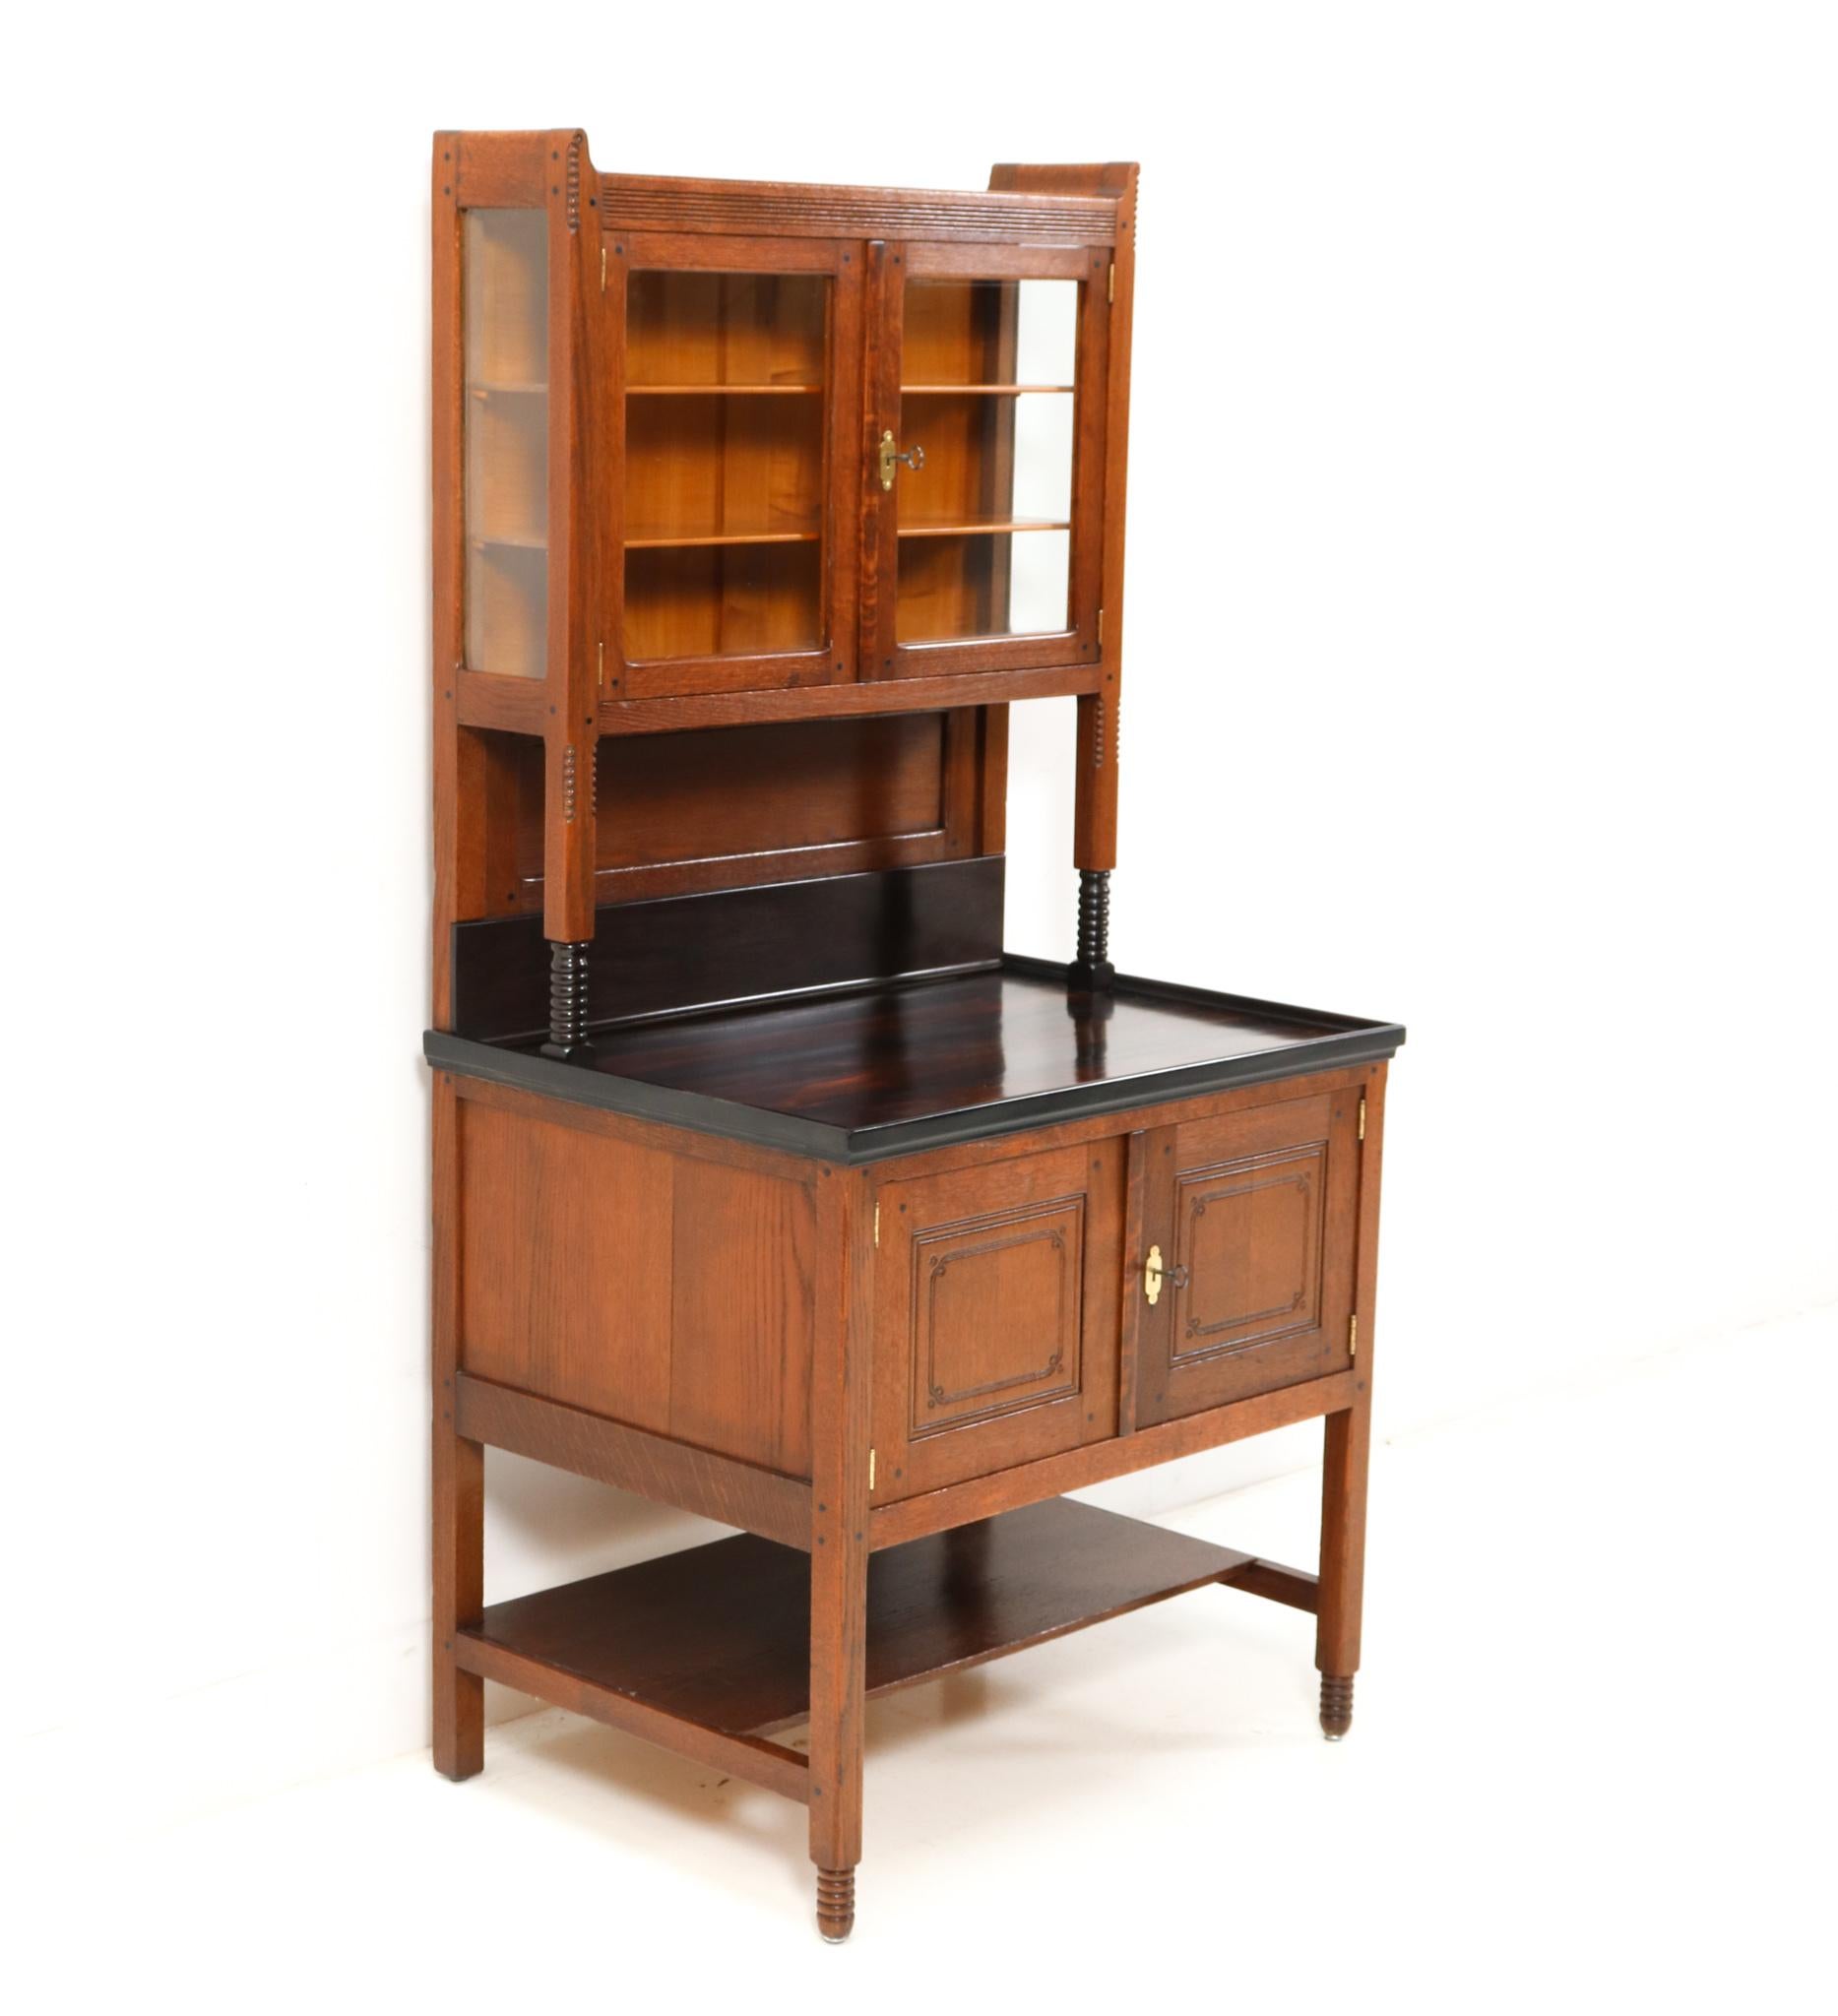 Magnificent and rare Art Nouveau Arts & Crafts cupboard or cabinet.
Design by Jac. van den Bosch for 't Binnenhuis Amsterdam.
Striking Dutch design from the 1900s.
Solid oak with original solid macassar ebony top.
Two original solid birch